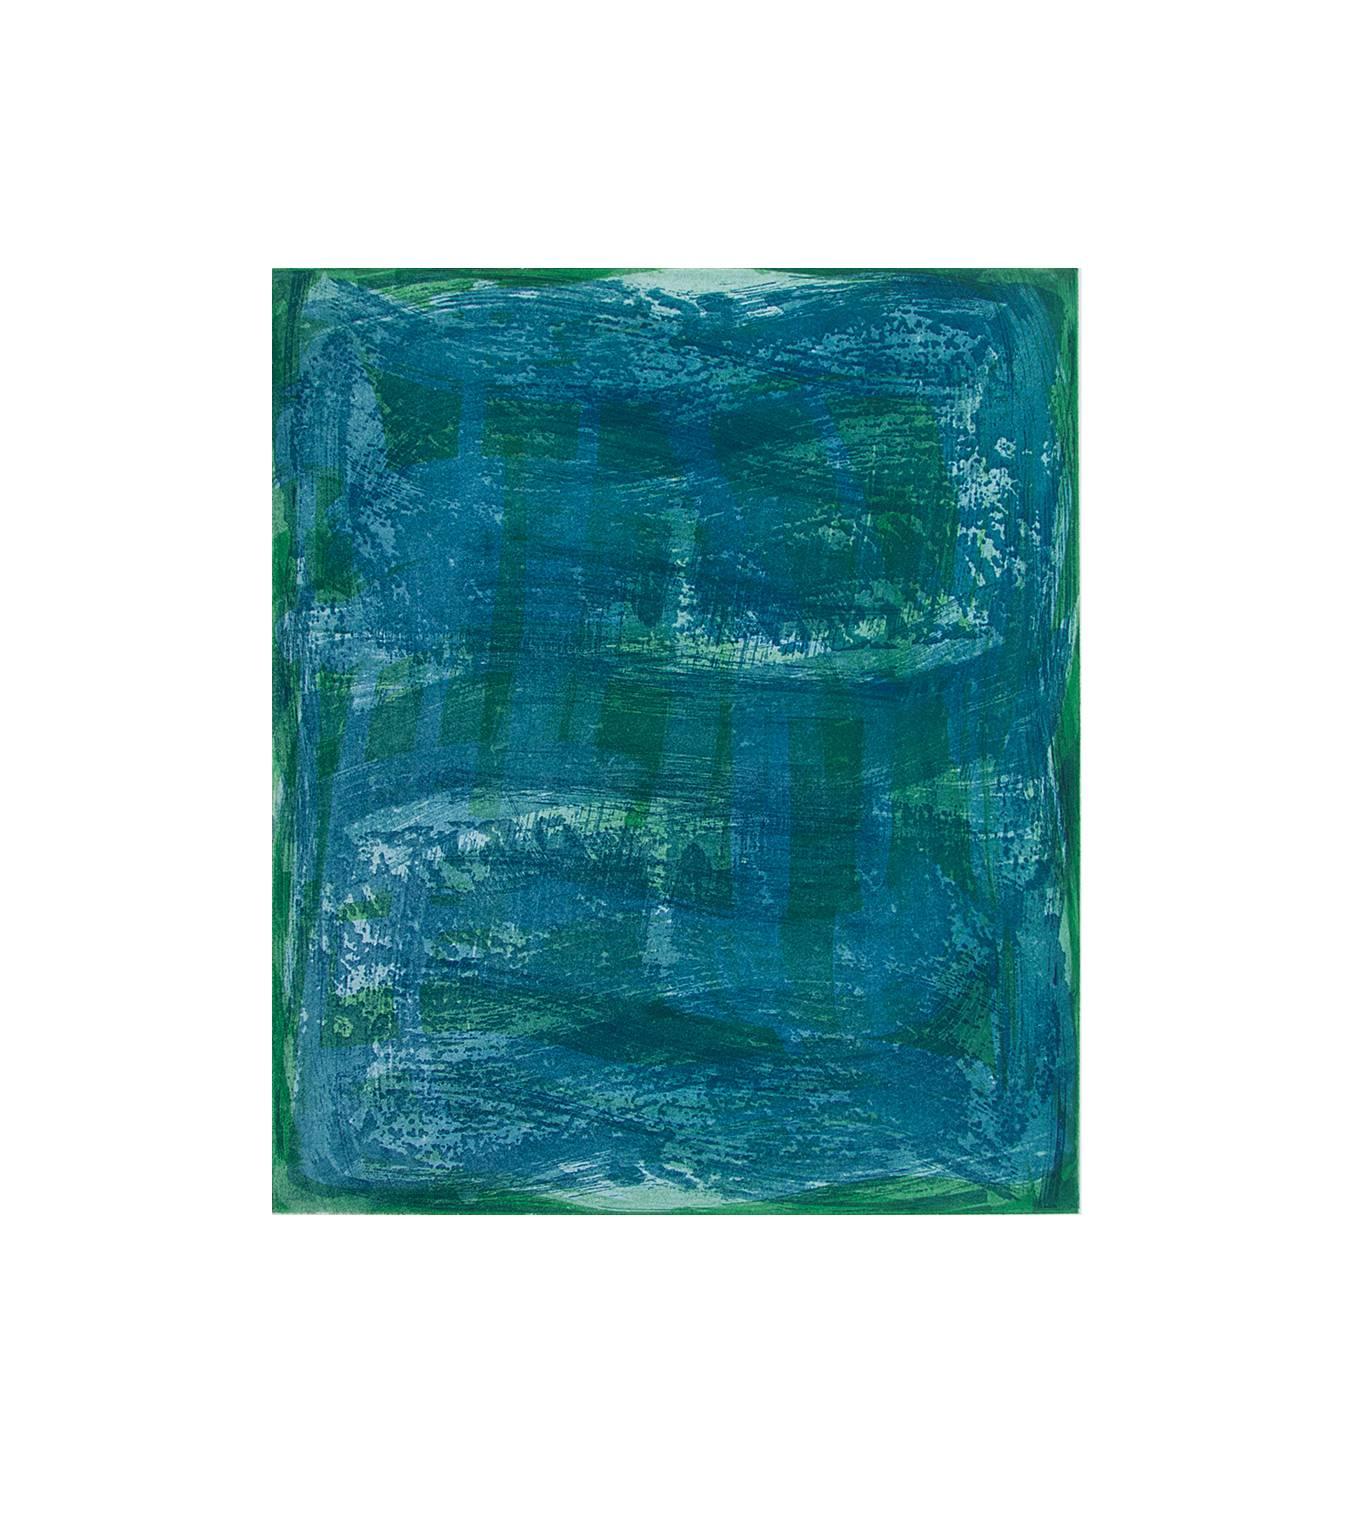 Anne Russinof Abstract Print - Serpentine 11, gestural abstract aquatint monoprint, turquoise, blue, green.